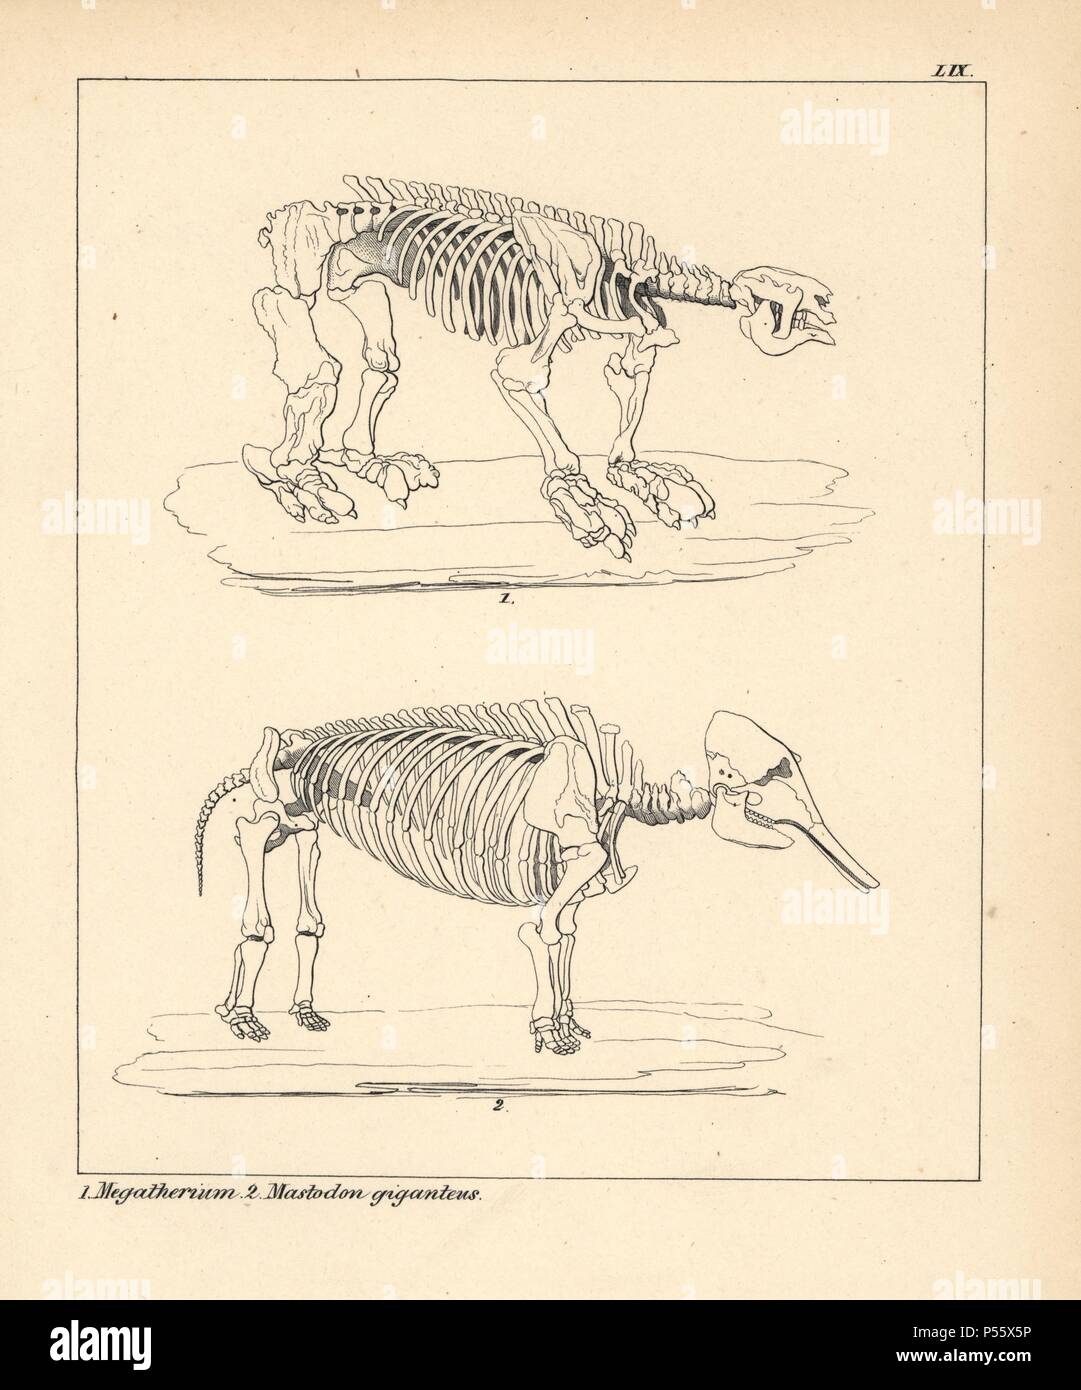 Skeleton of the Megatherium, an extinct giant ground sloth, and Mastodon  giganteus, or the American mastodon, Mammut americanum. Lithograph by an  unknown artist from Dr. F.A. Schmidt's "Petrefactenbuch," published in  Stuttgart, Germany,